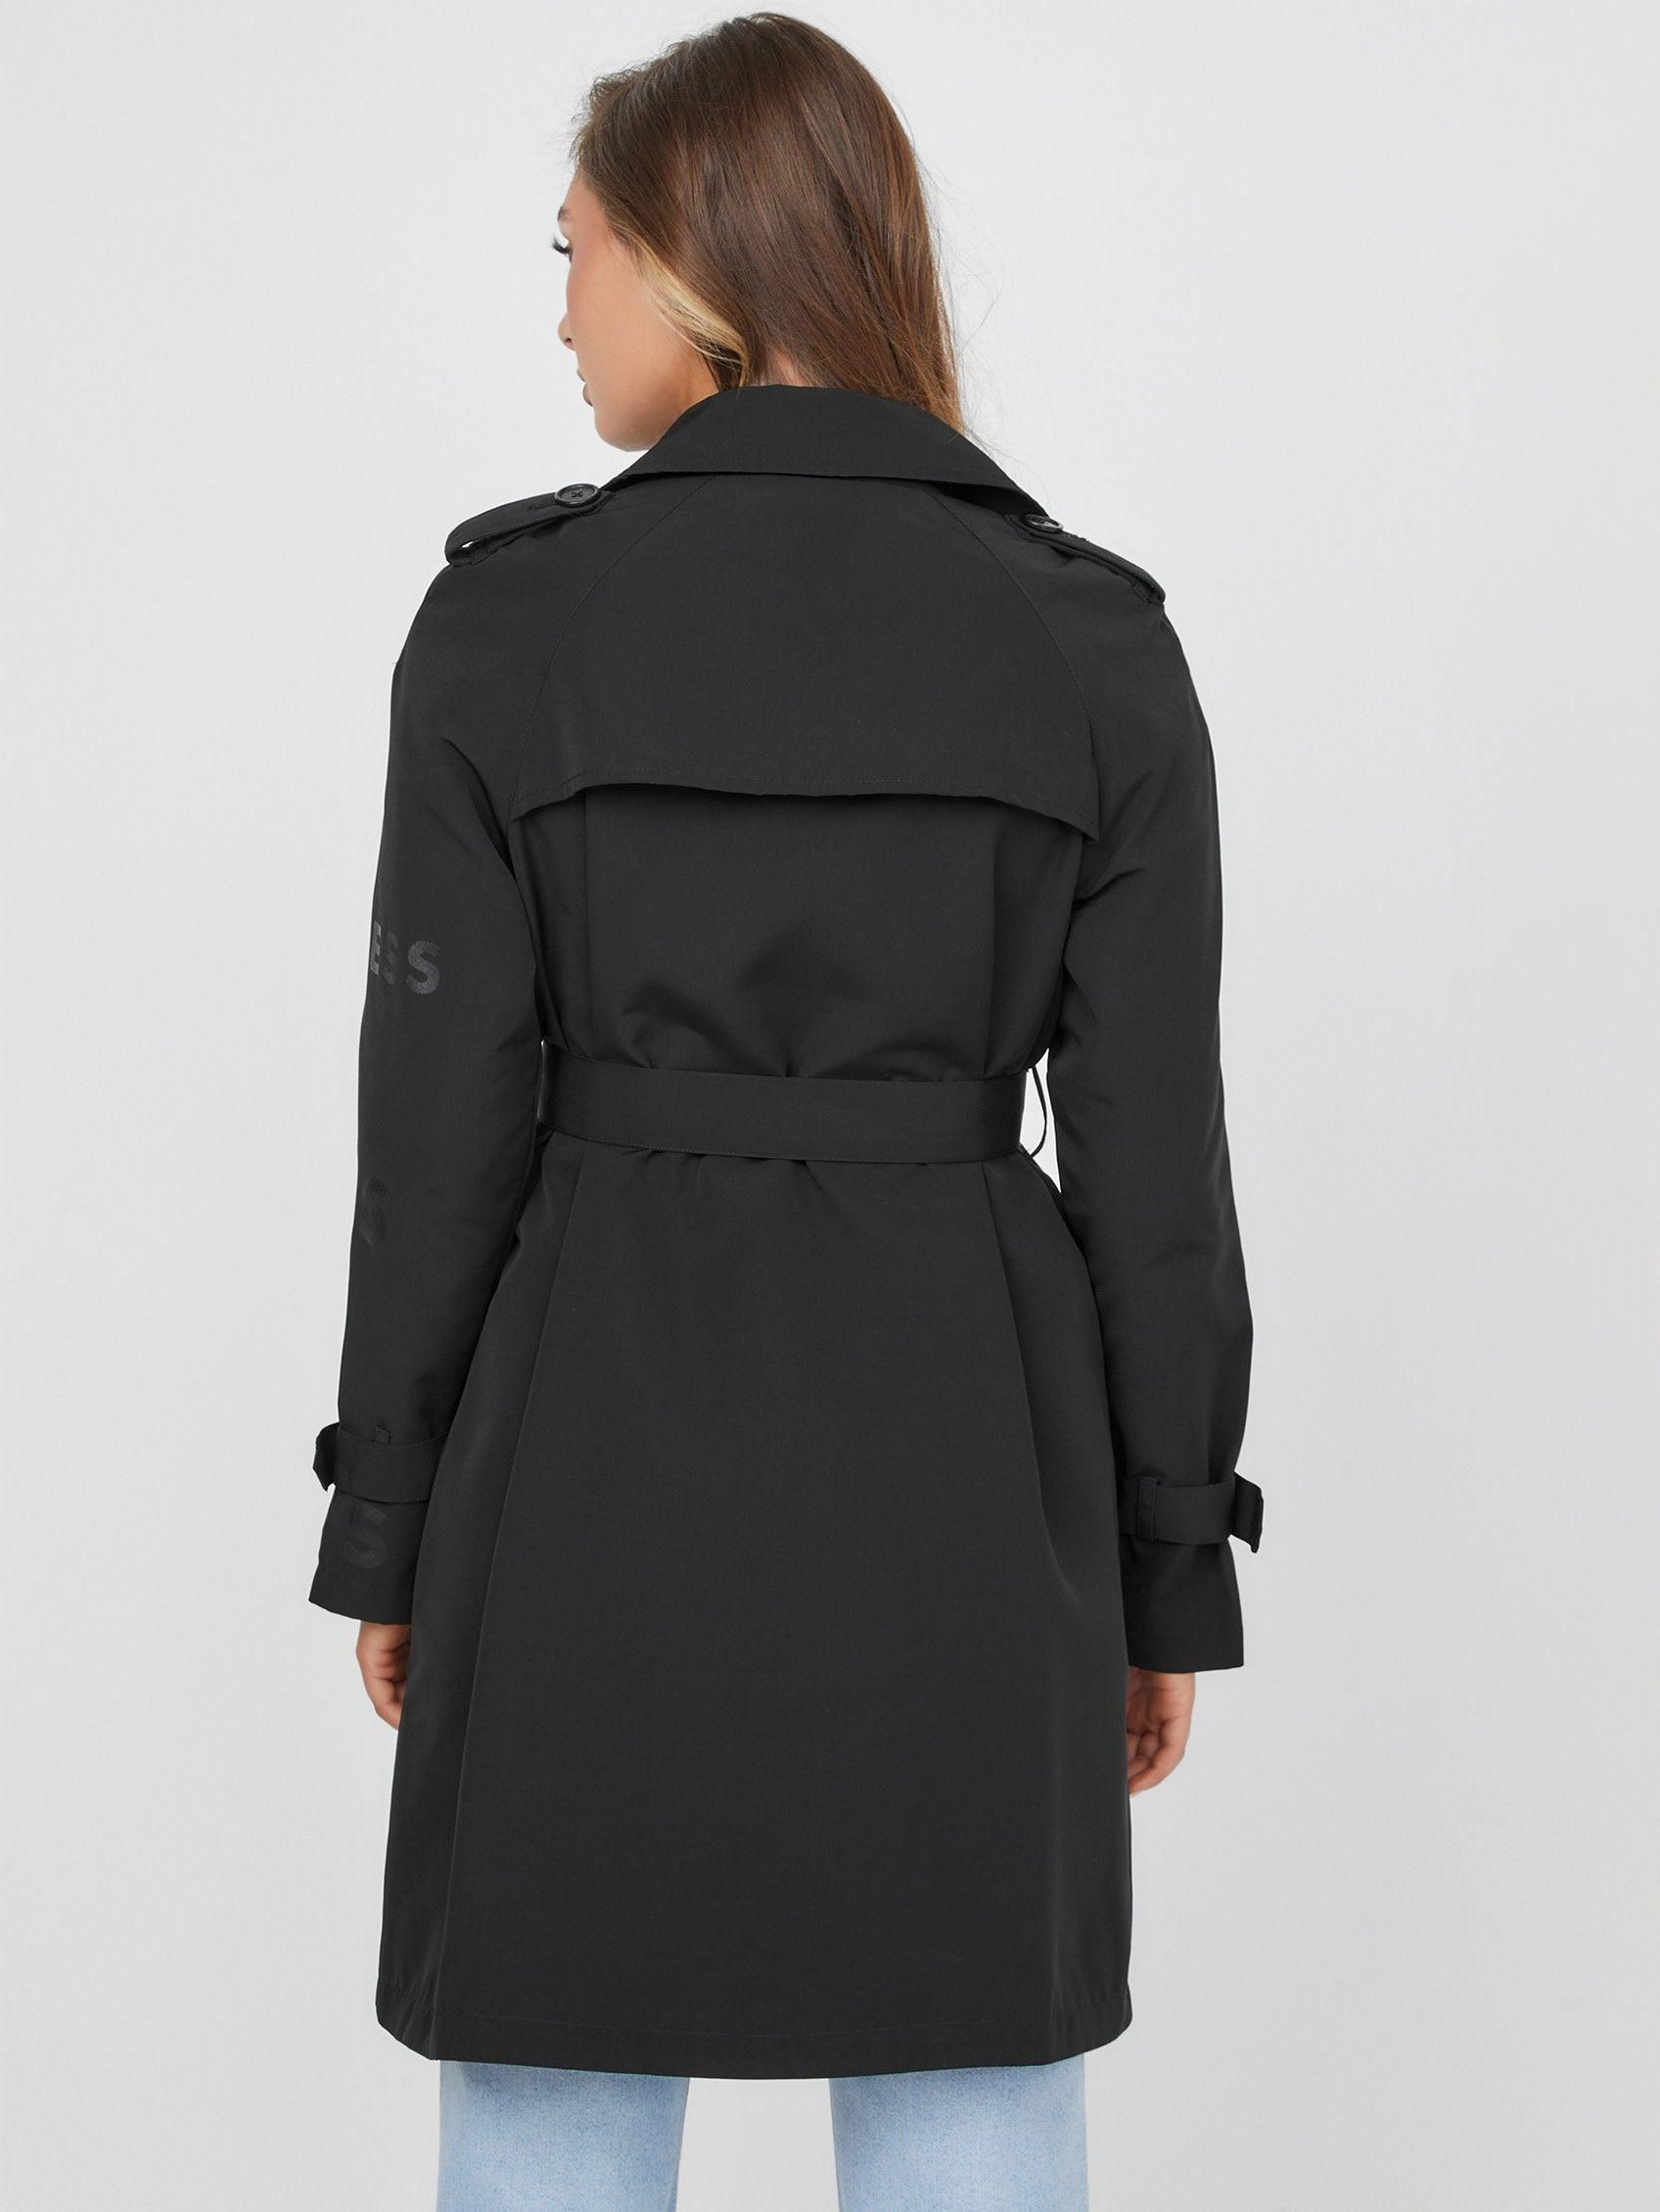 Guess Factory Madge Trench Coat in Black | Lyst